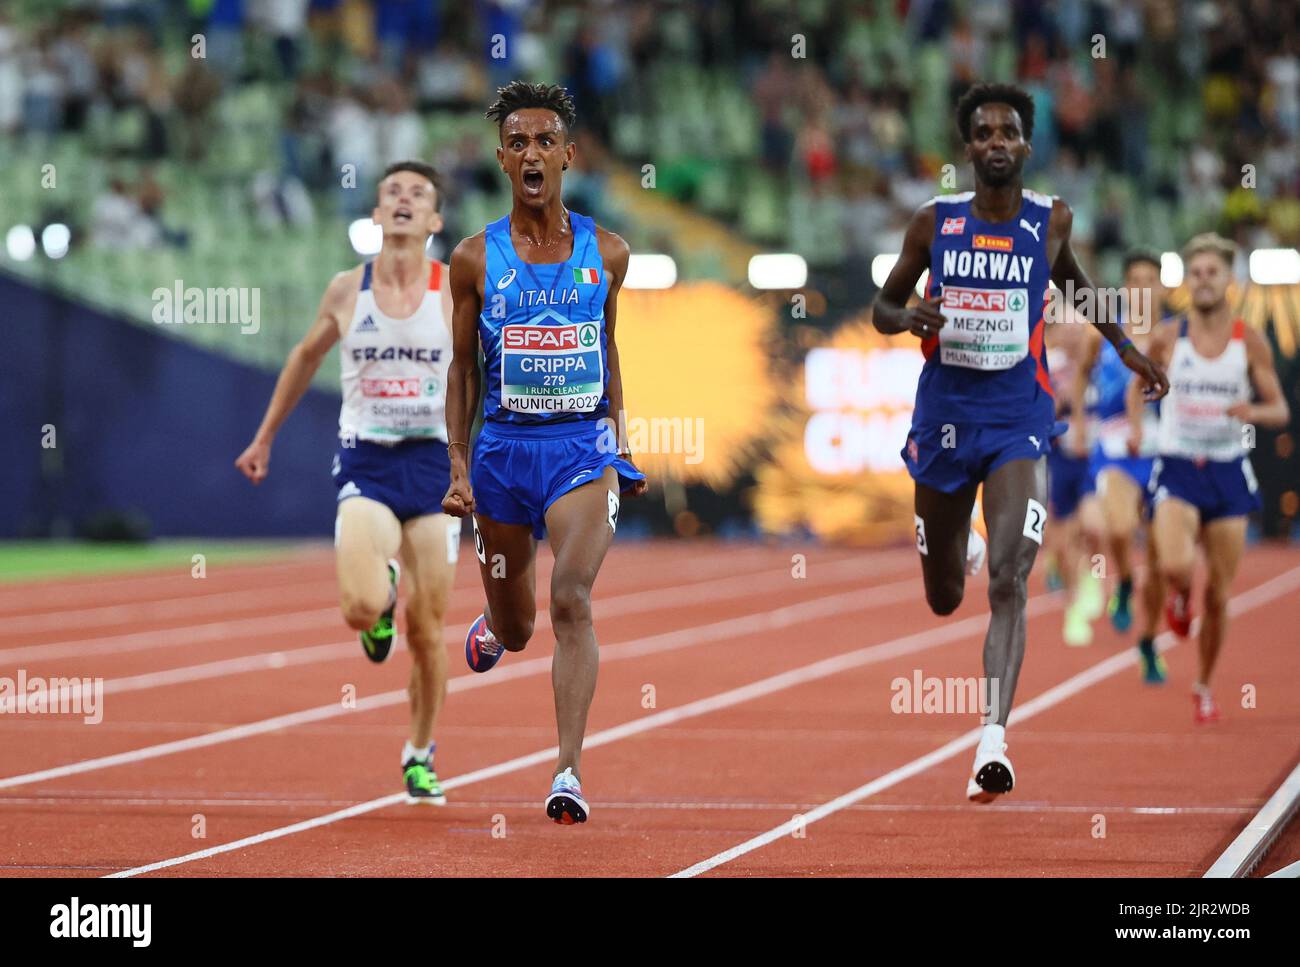 2022 European Championships - Athletics - Olympiastadion, Munich, Germany - August 21, 2022 Italy's Yemaneberhan Crippa celebrates after winning gold in the men's 10,000m final REUTERS/Wolfgang Rattay  REFILE - CORRECTING ID Stock Photo